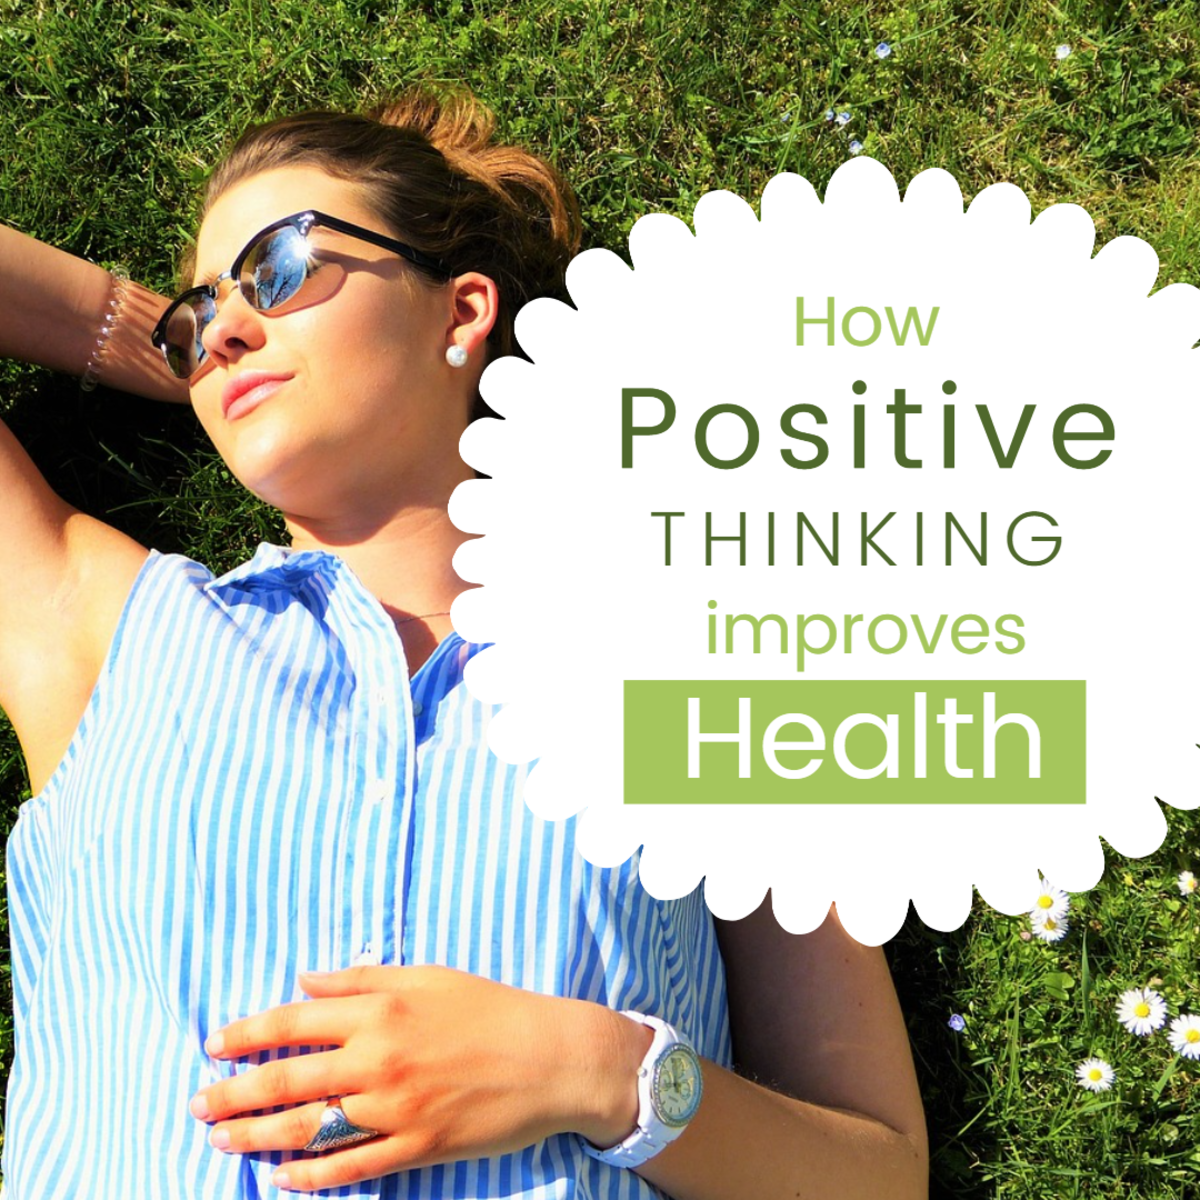 How Positive Thinking Improves Health